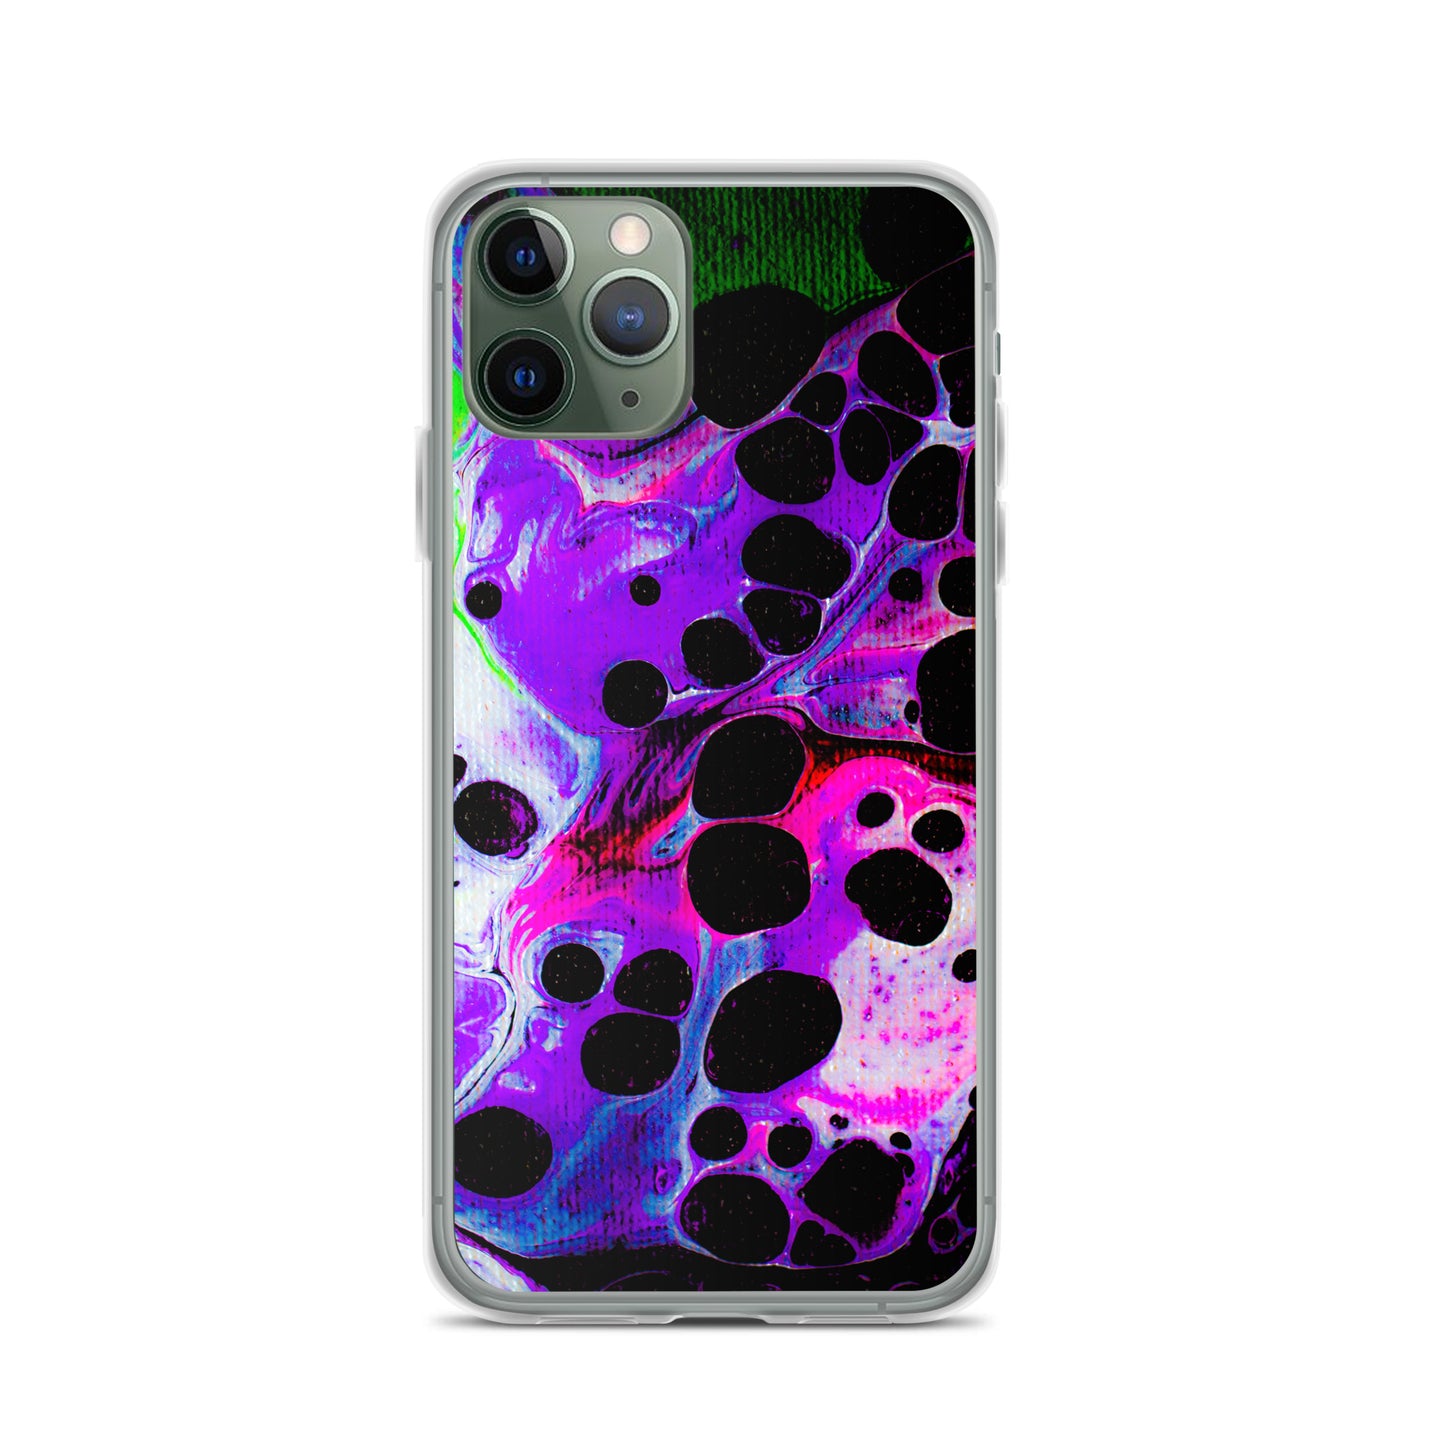 NightOwl Studio Custom Phone Case Compatible with iPhone, Ultra Slim Cover with Heavy Duty Scratch Resistant Shockproof Protection, Carbonated Color